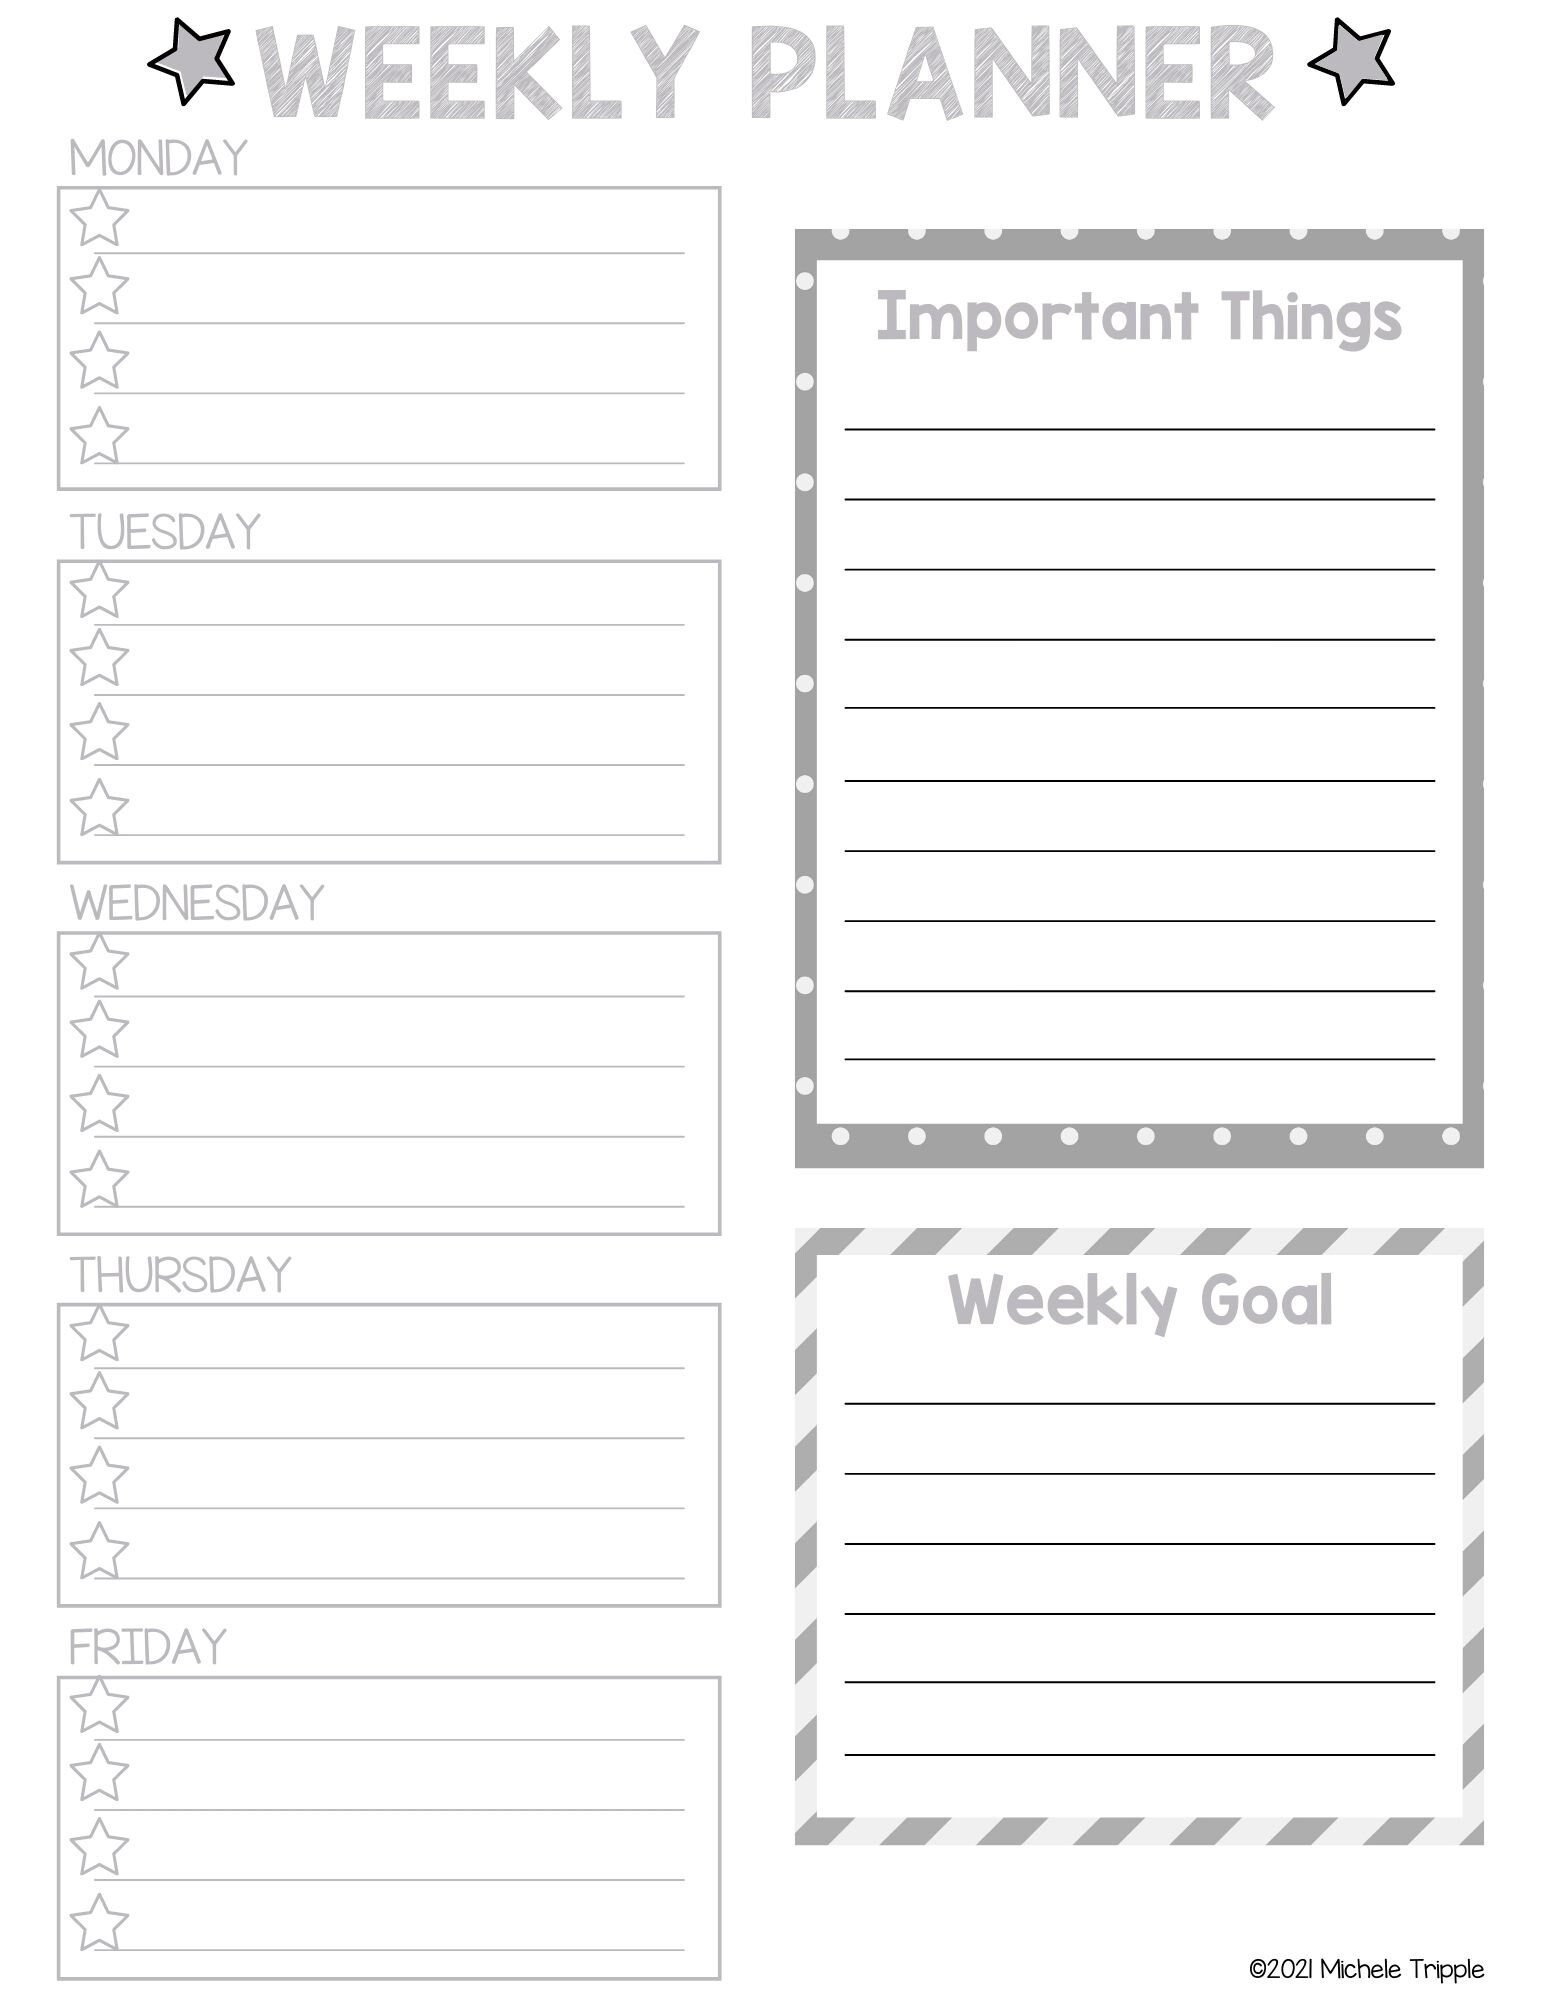 Weekly Planner Printable to Do List - Etsy Canada